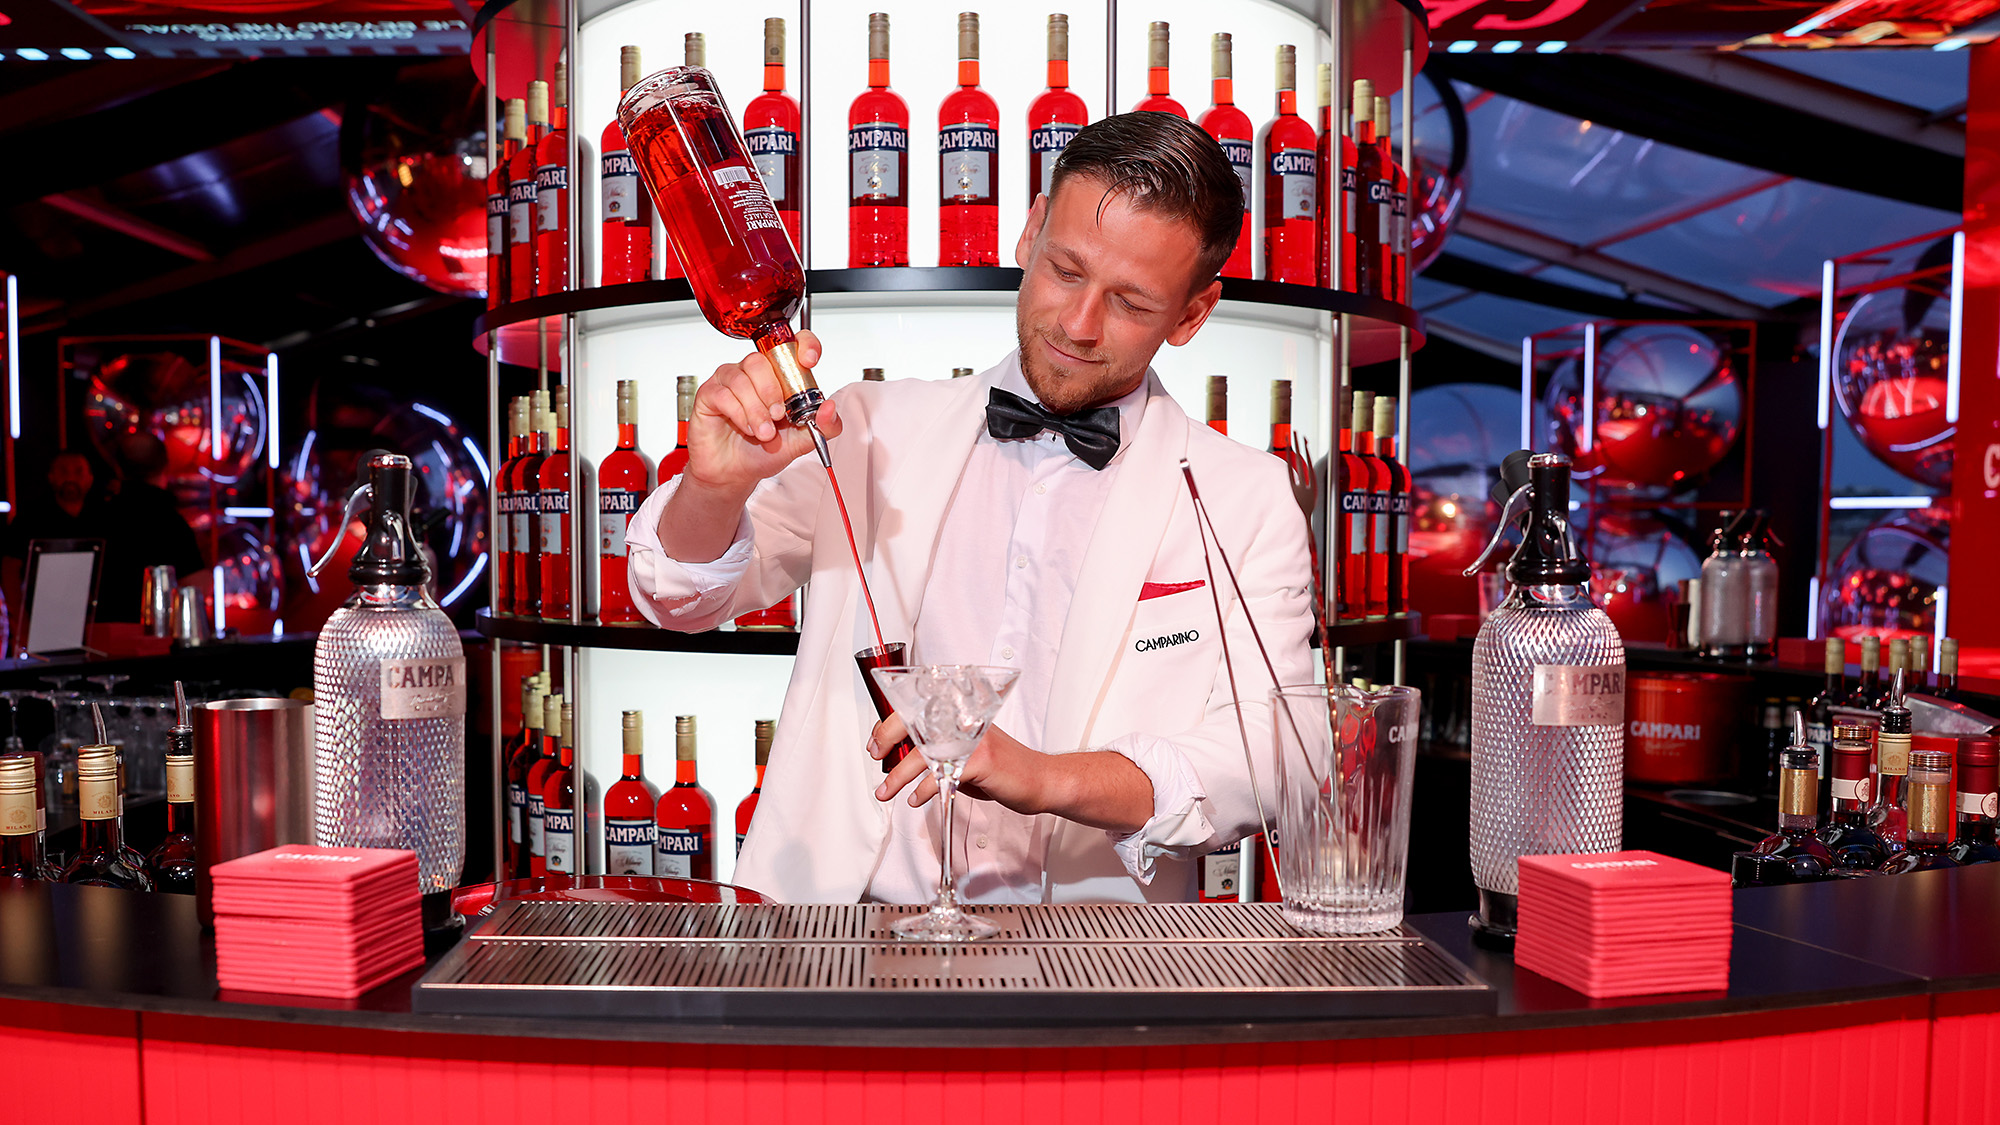 The Official Cocktail Of Cannes For 2023 Is A Campari-Based Celebration Of The Red Carpet